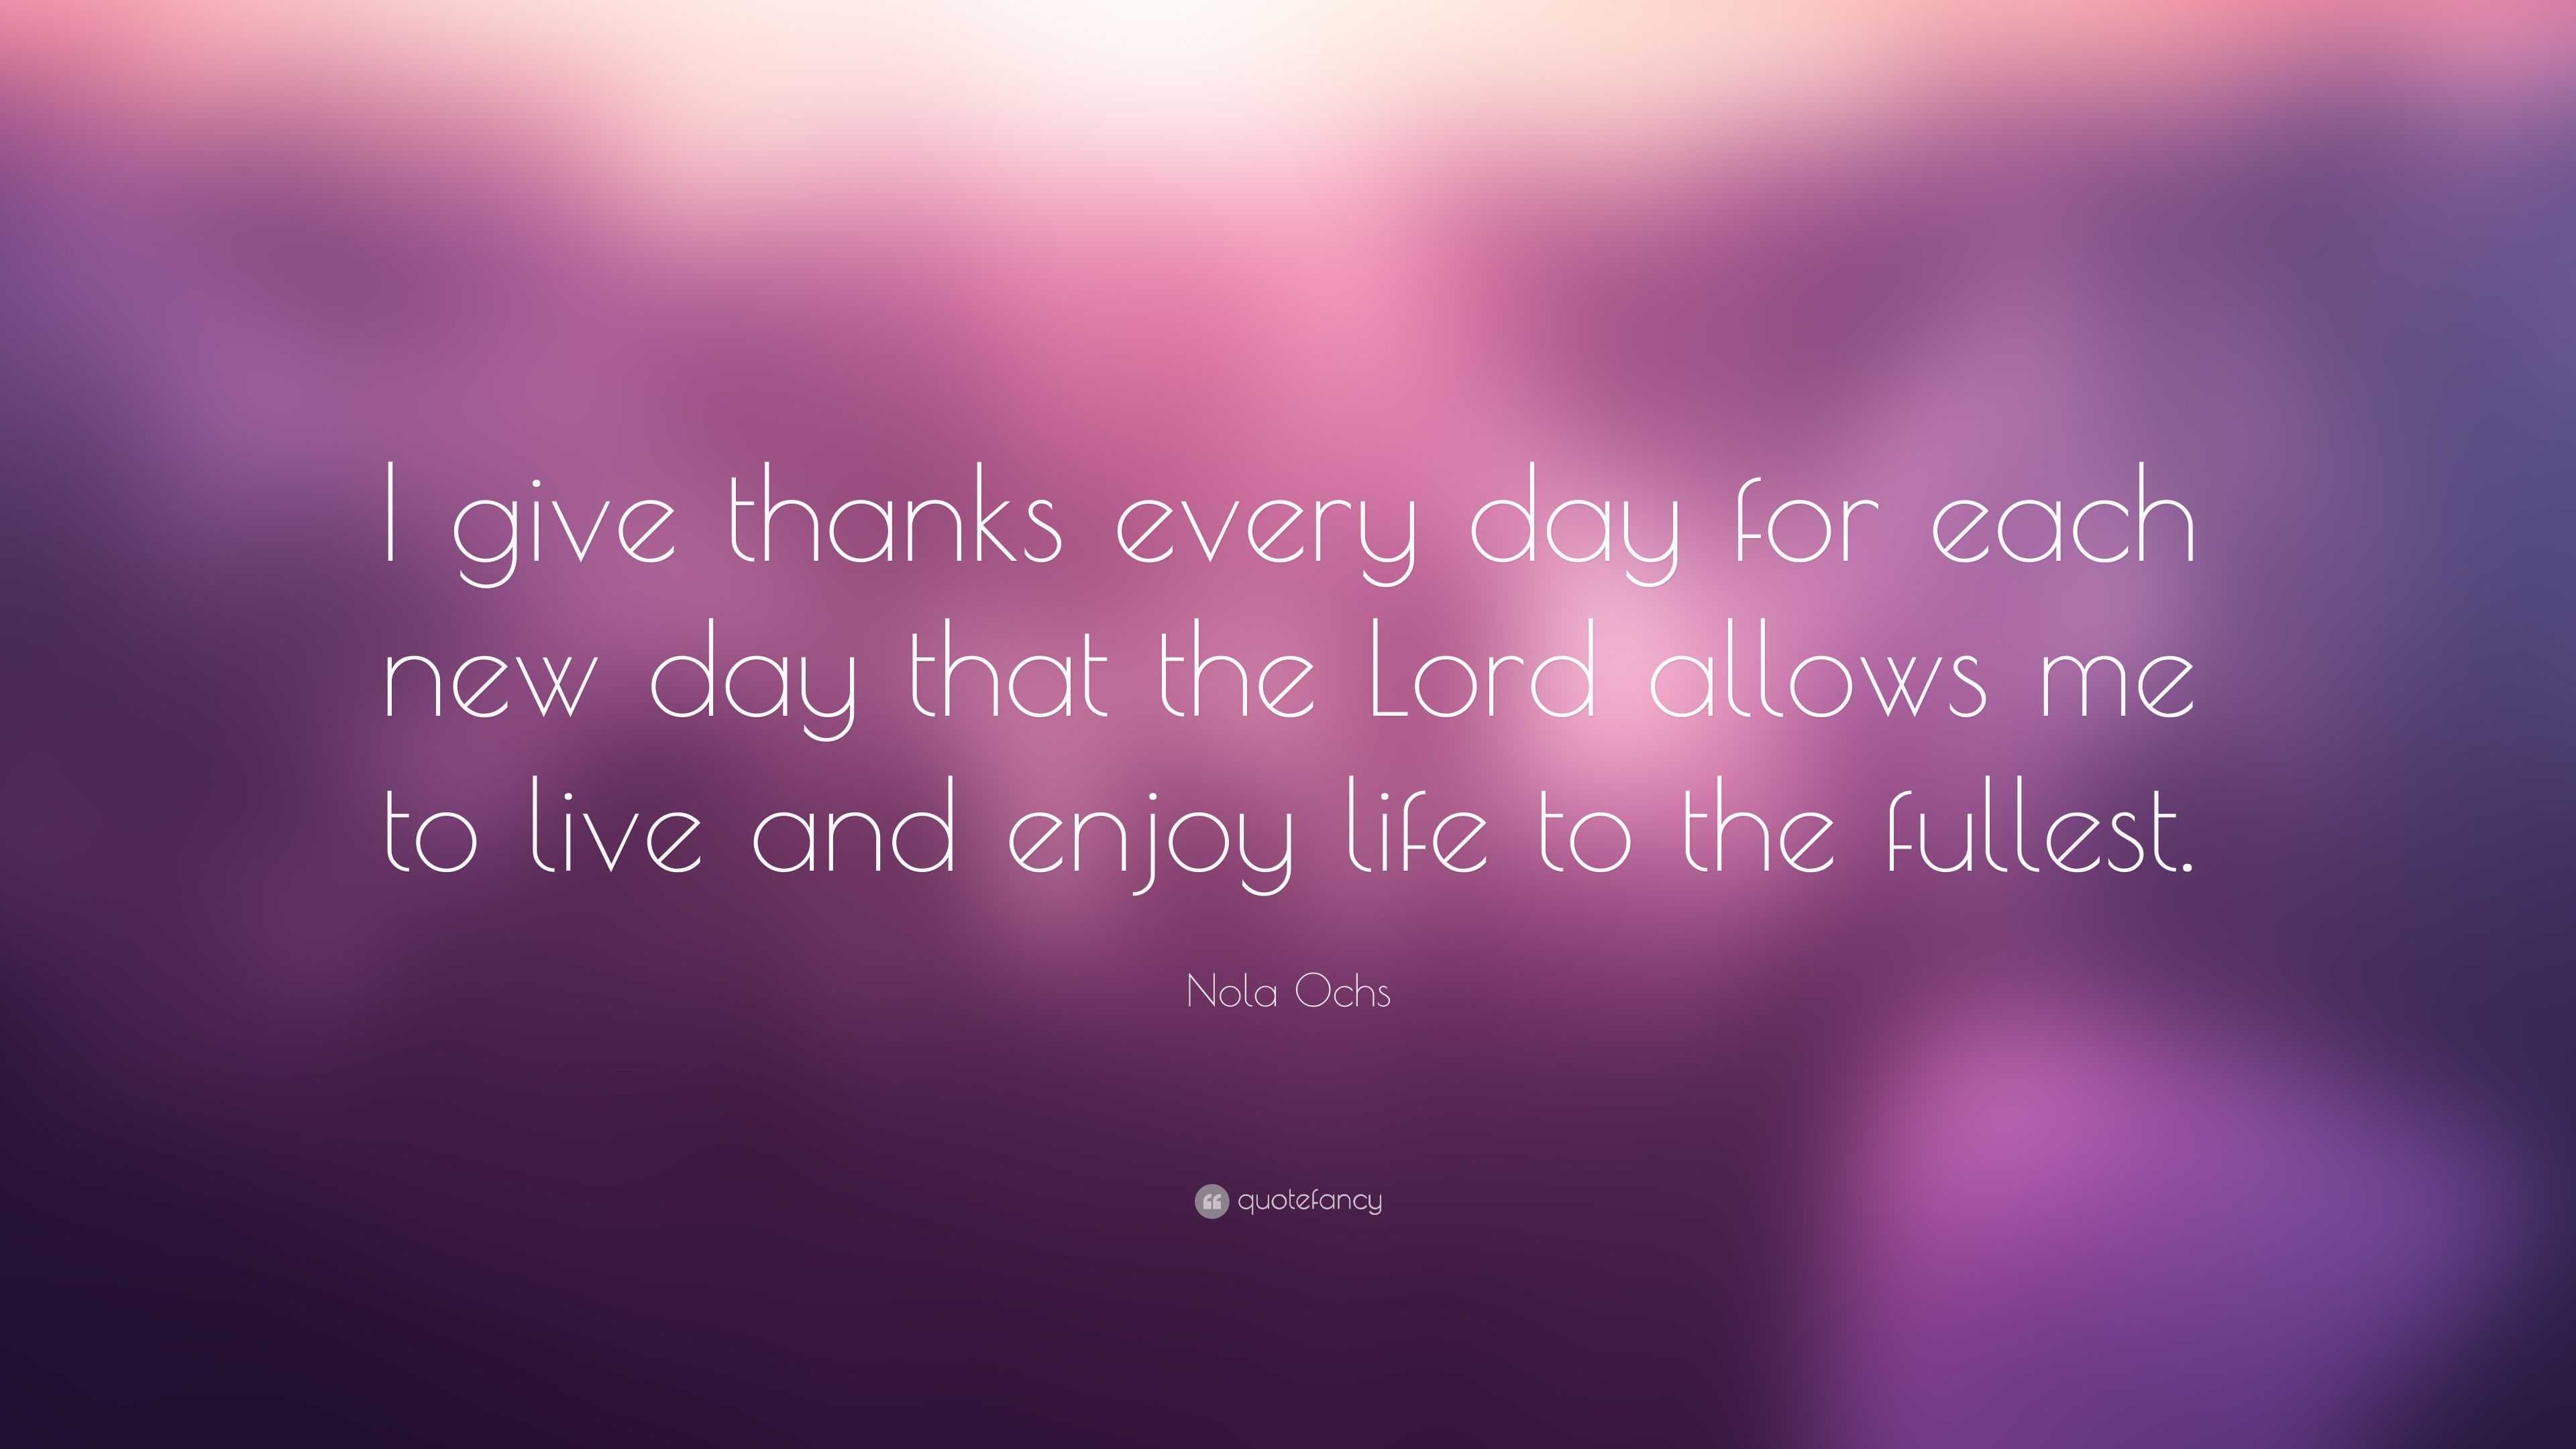 Nola Ochs Quote “I give thanks every day for each new day that the